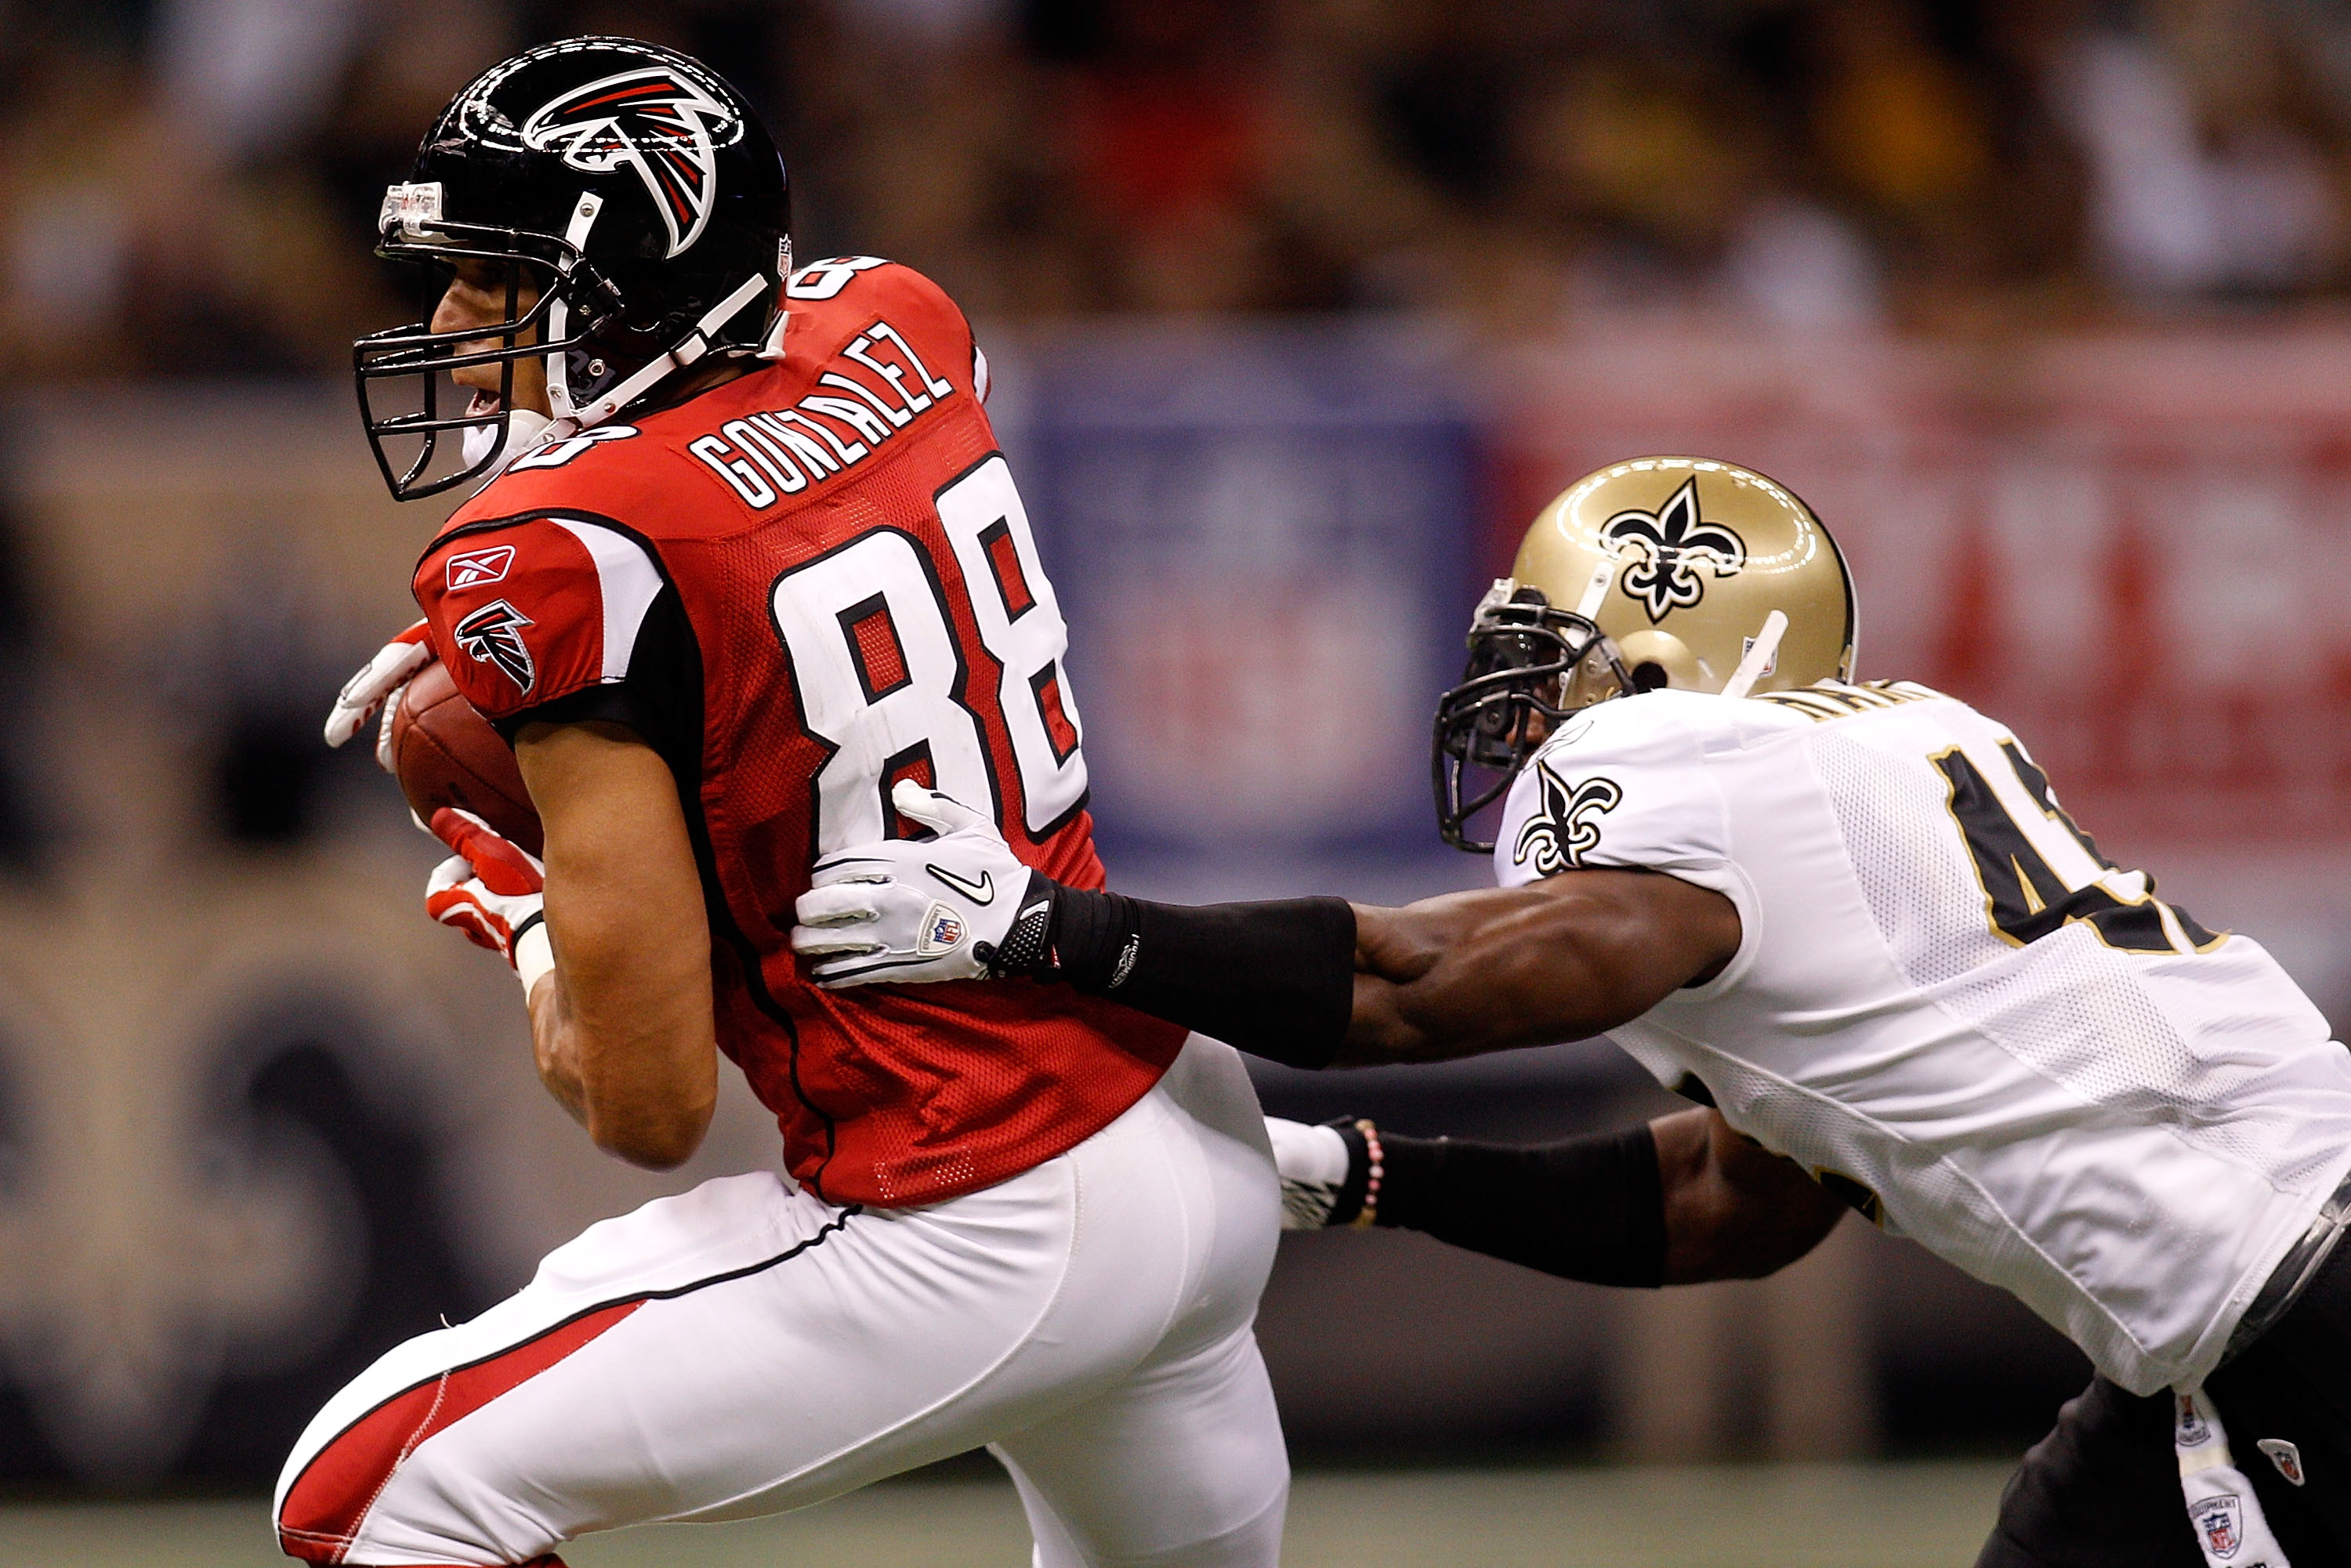 NEW ORLEANS - SEPTEMBER 26:  Tony Gonzalez #88 of the Atlanta Falcons is tackled as he makes a catch by Roman Harper #41 of the New Orleans Saints at the Louisiana Superdome on September 26, 2010 in New Orleans, Louisiana.  (Photo by Chris Graythen/Getty